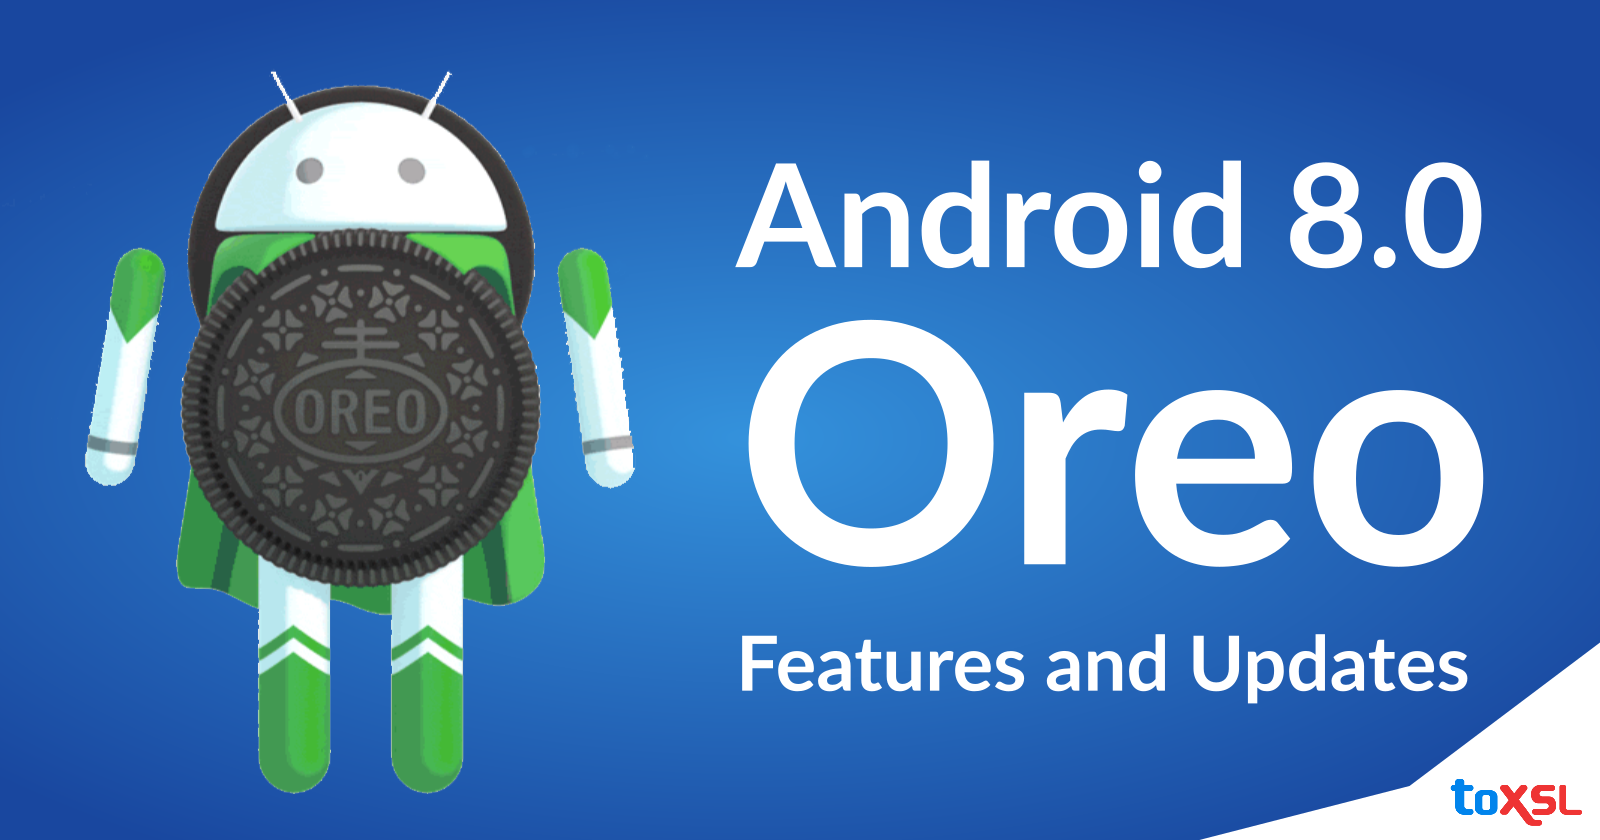 An Insight Into the Top Features and Updates of Android 8.0 Oreo